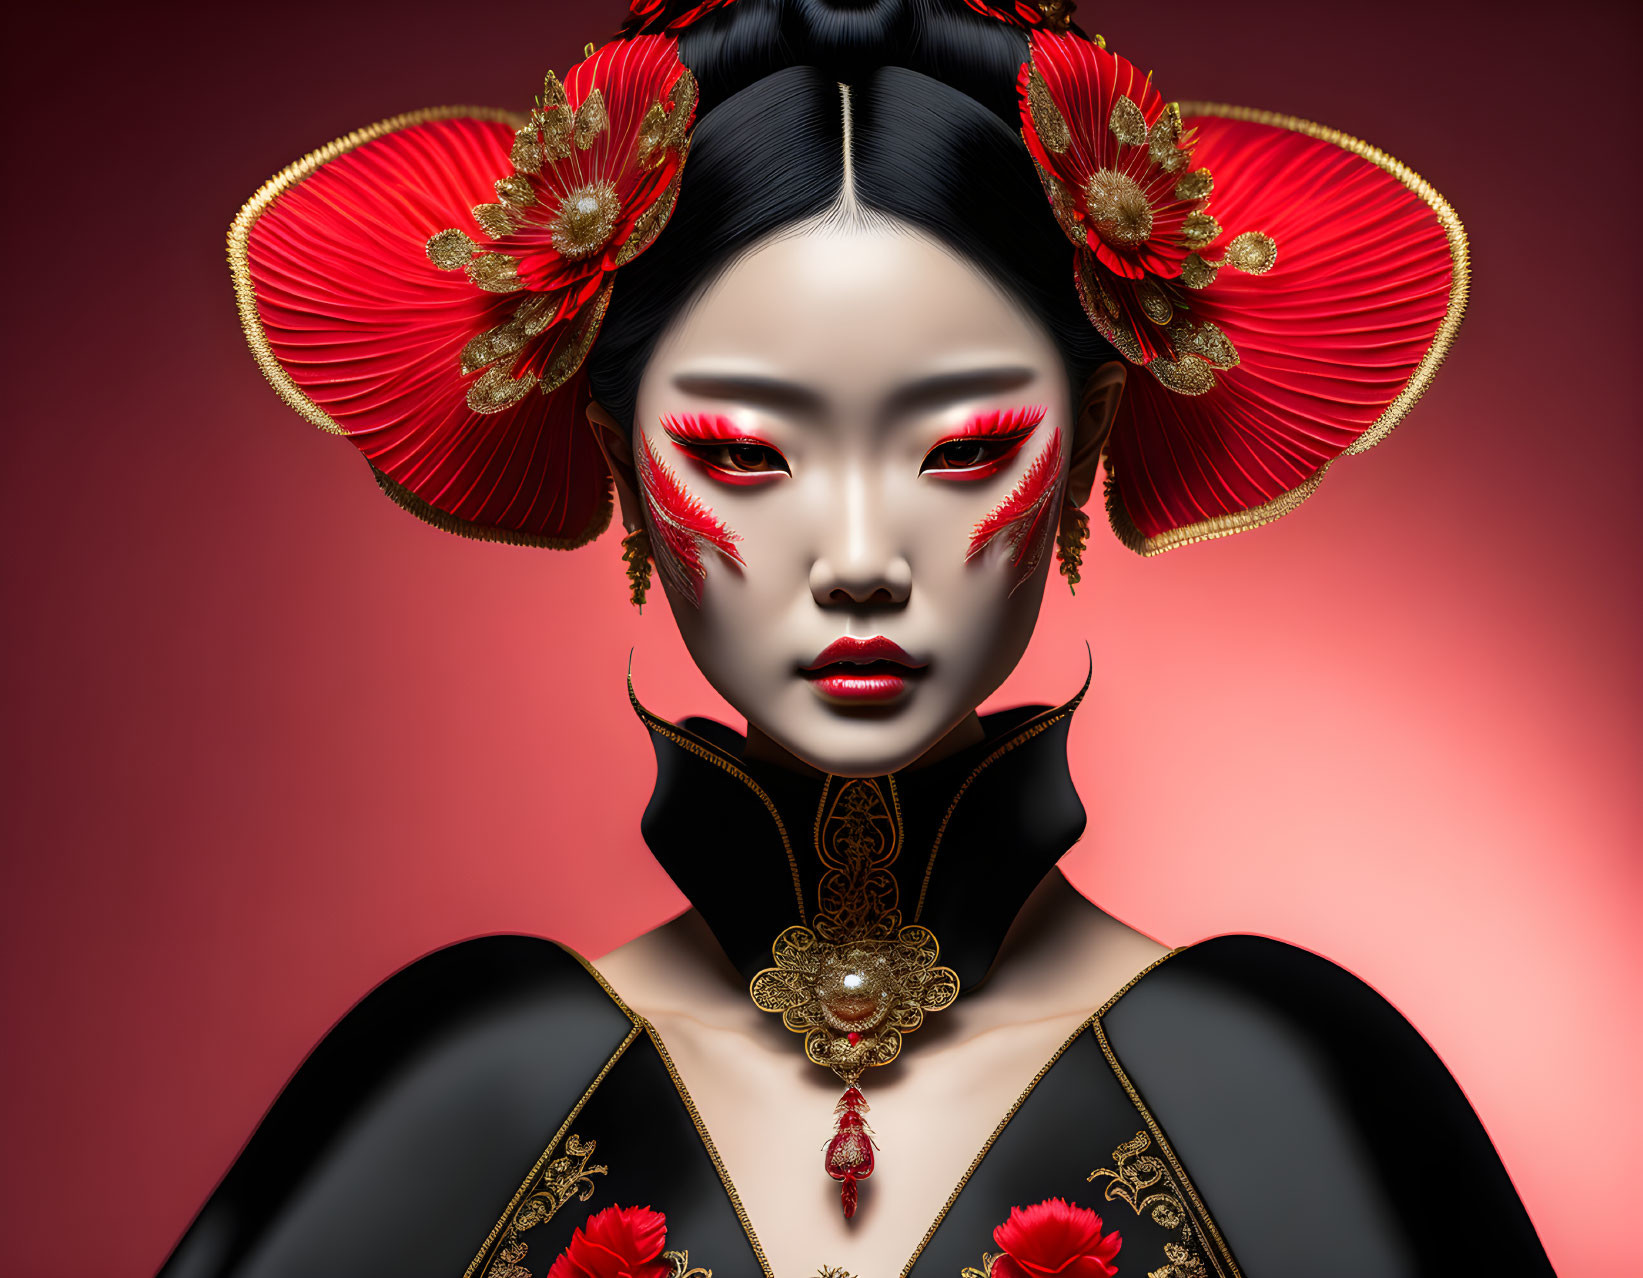 Digital artwork: Woman with red eye makeup and Chinese headdress on red gradient.